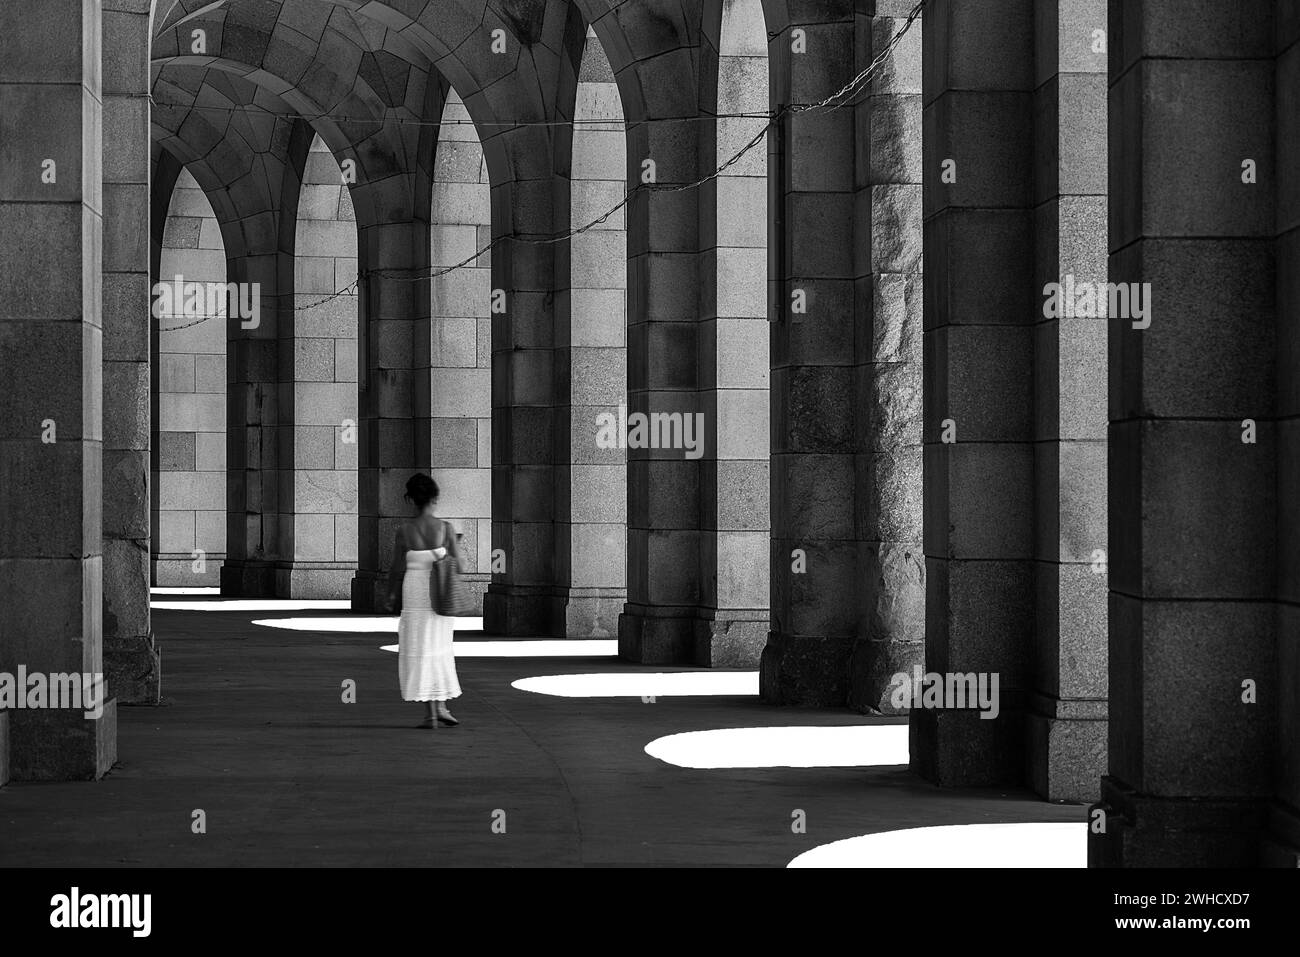 Lady in a white dress in the arcade of the Congress Hall, unfinished National Socialist monumental building on the Nazi Party Rally Grounds Stock Photo